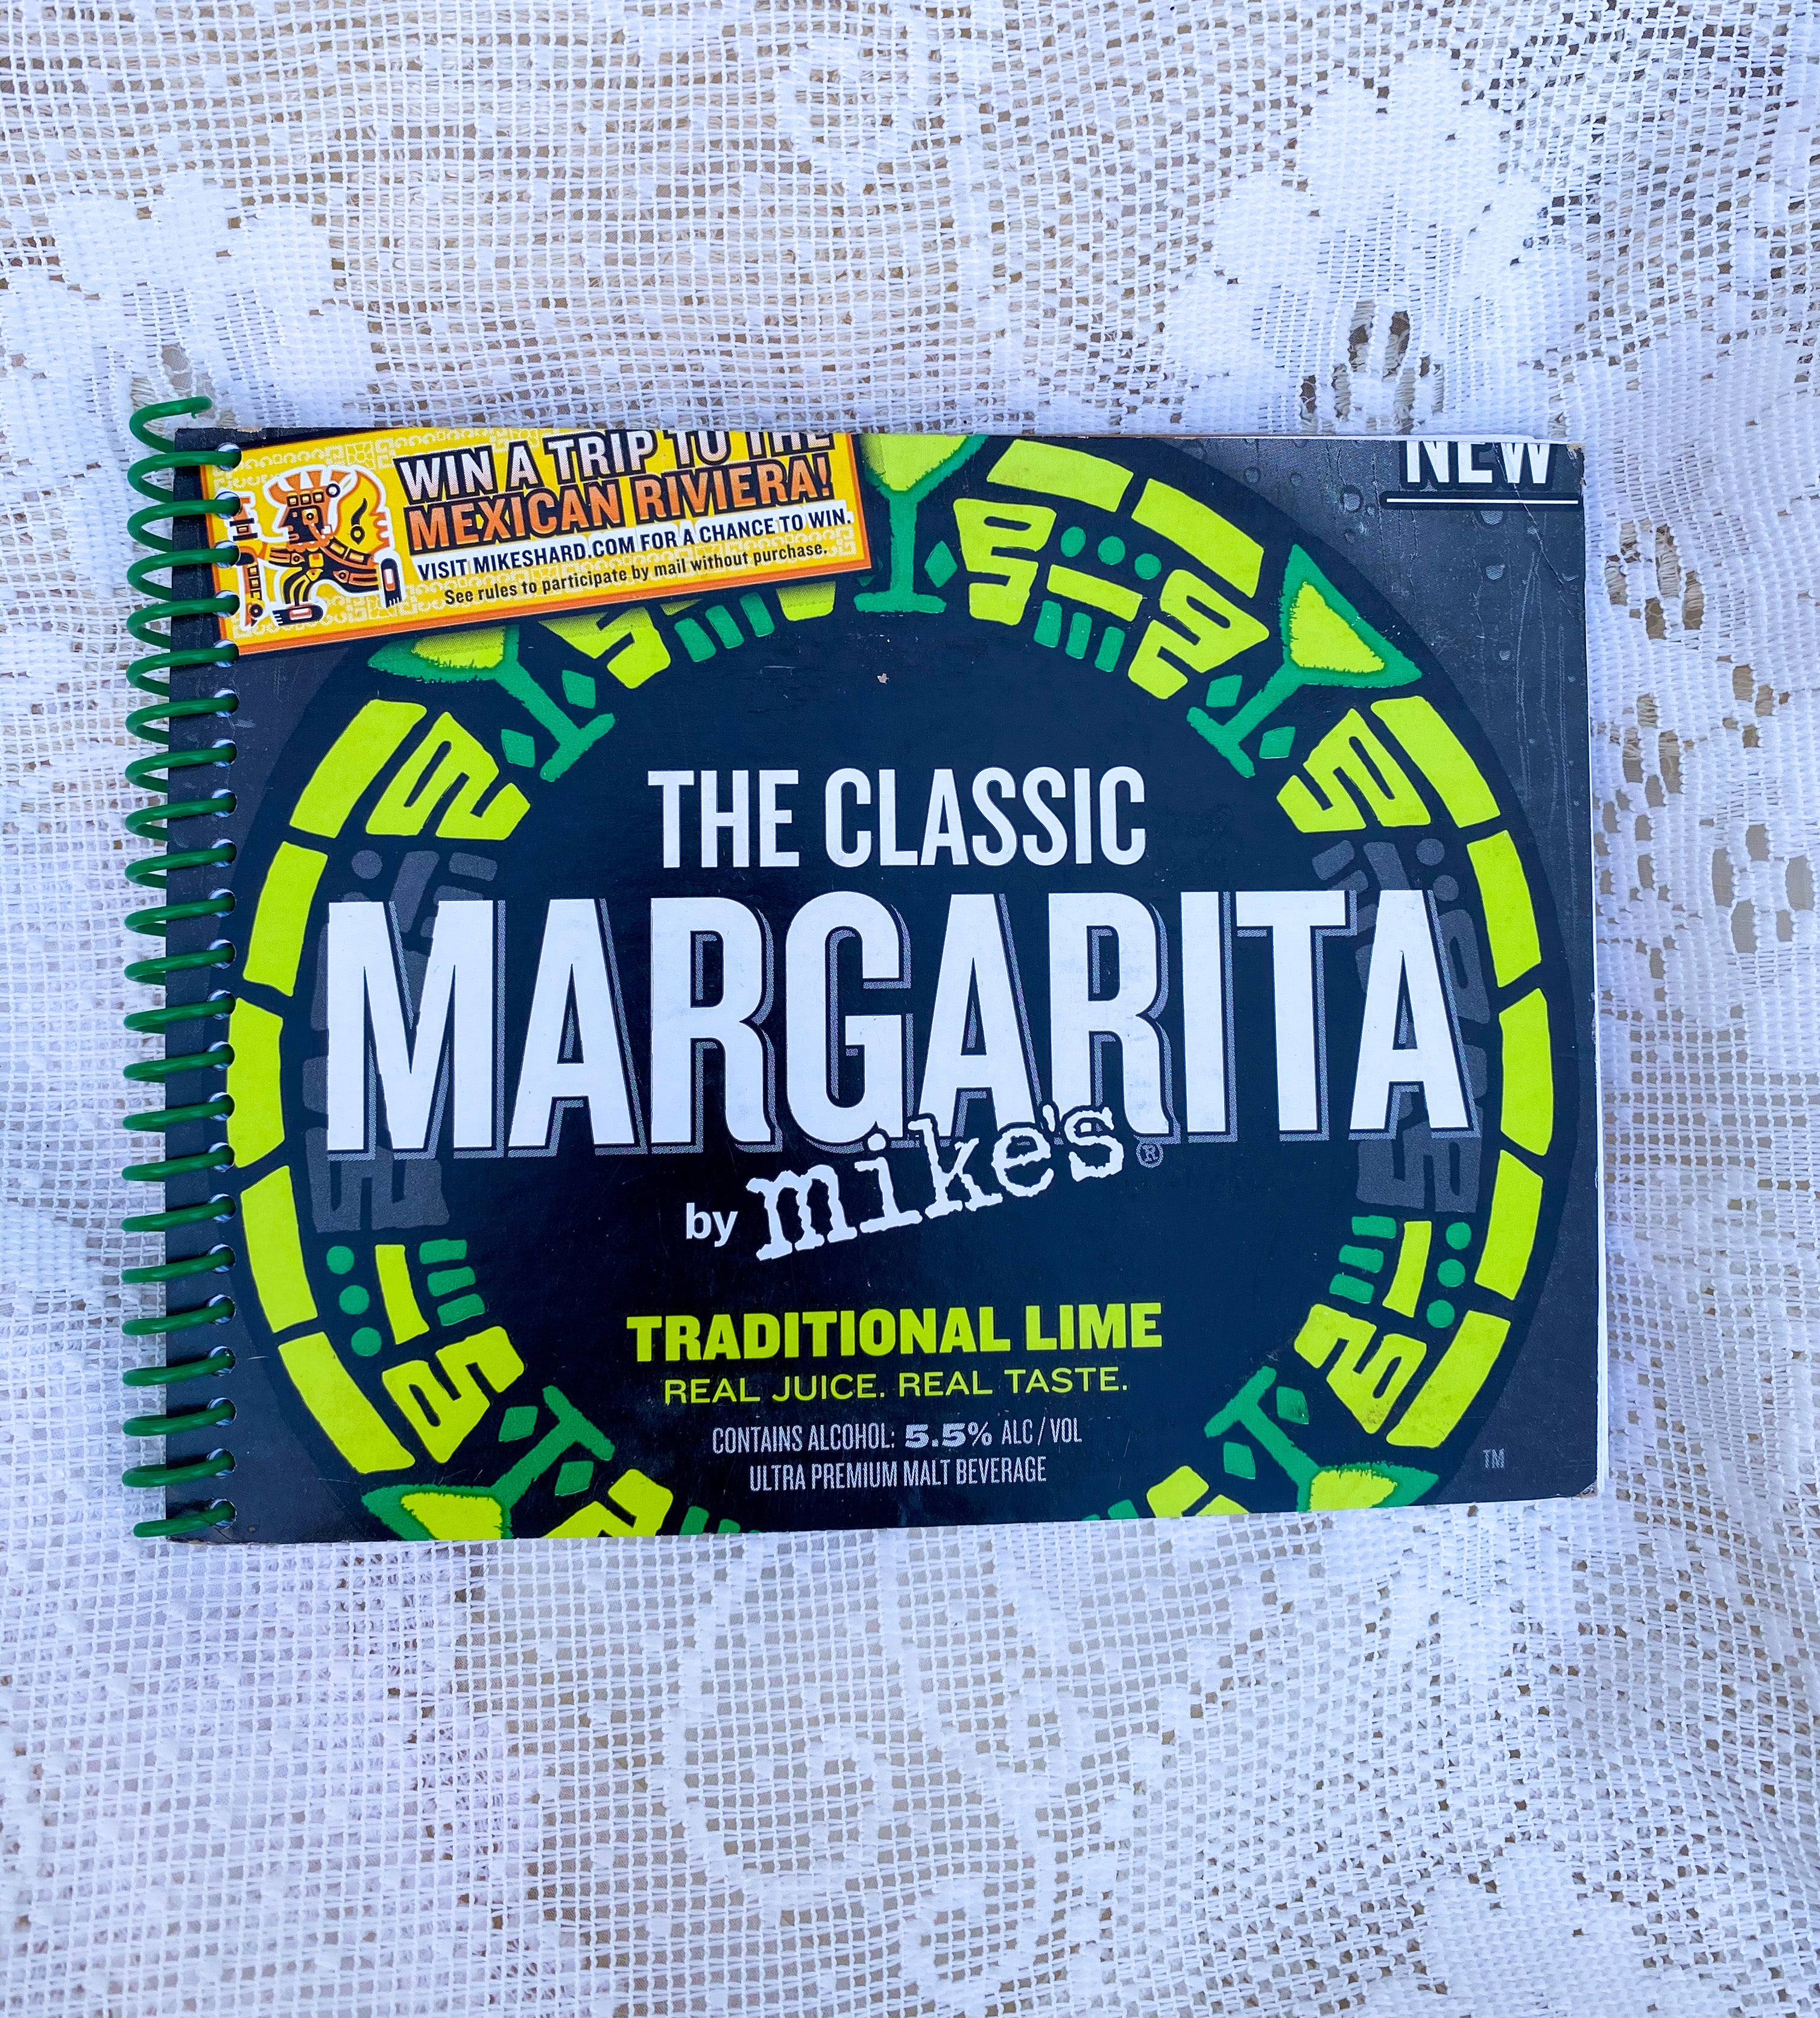 Mike’s Classic Margarita Recycled Beer Carton Notebook